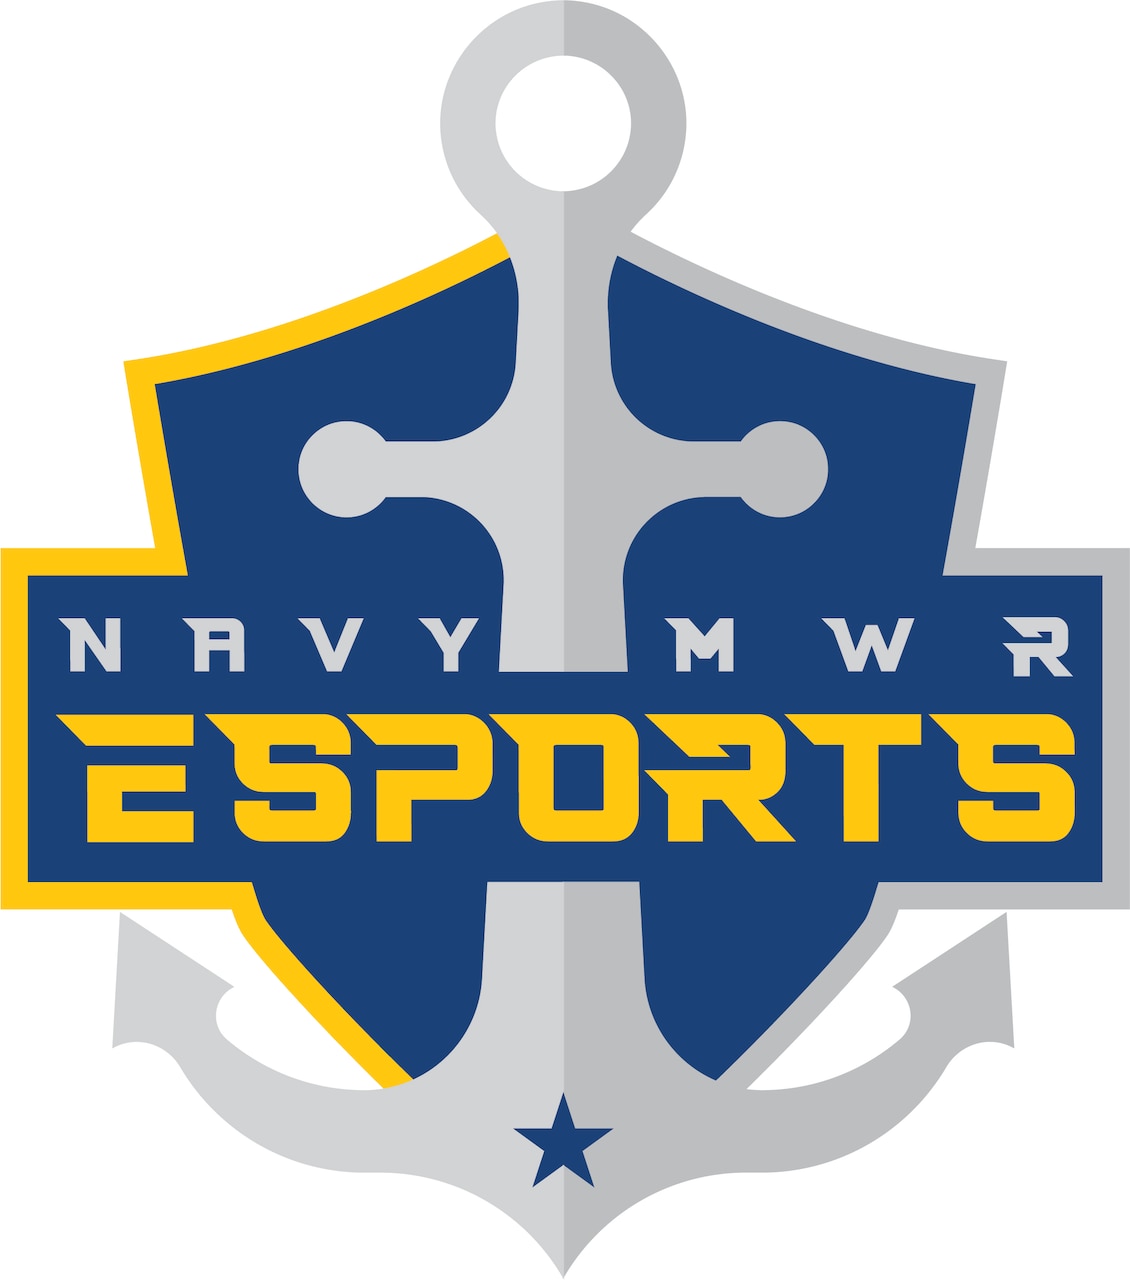 Navy MWR Esports Holiday Series Returns with Legendary Game Title